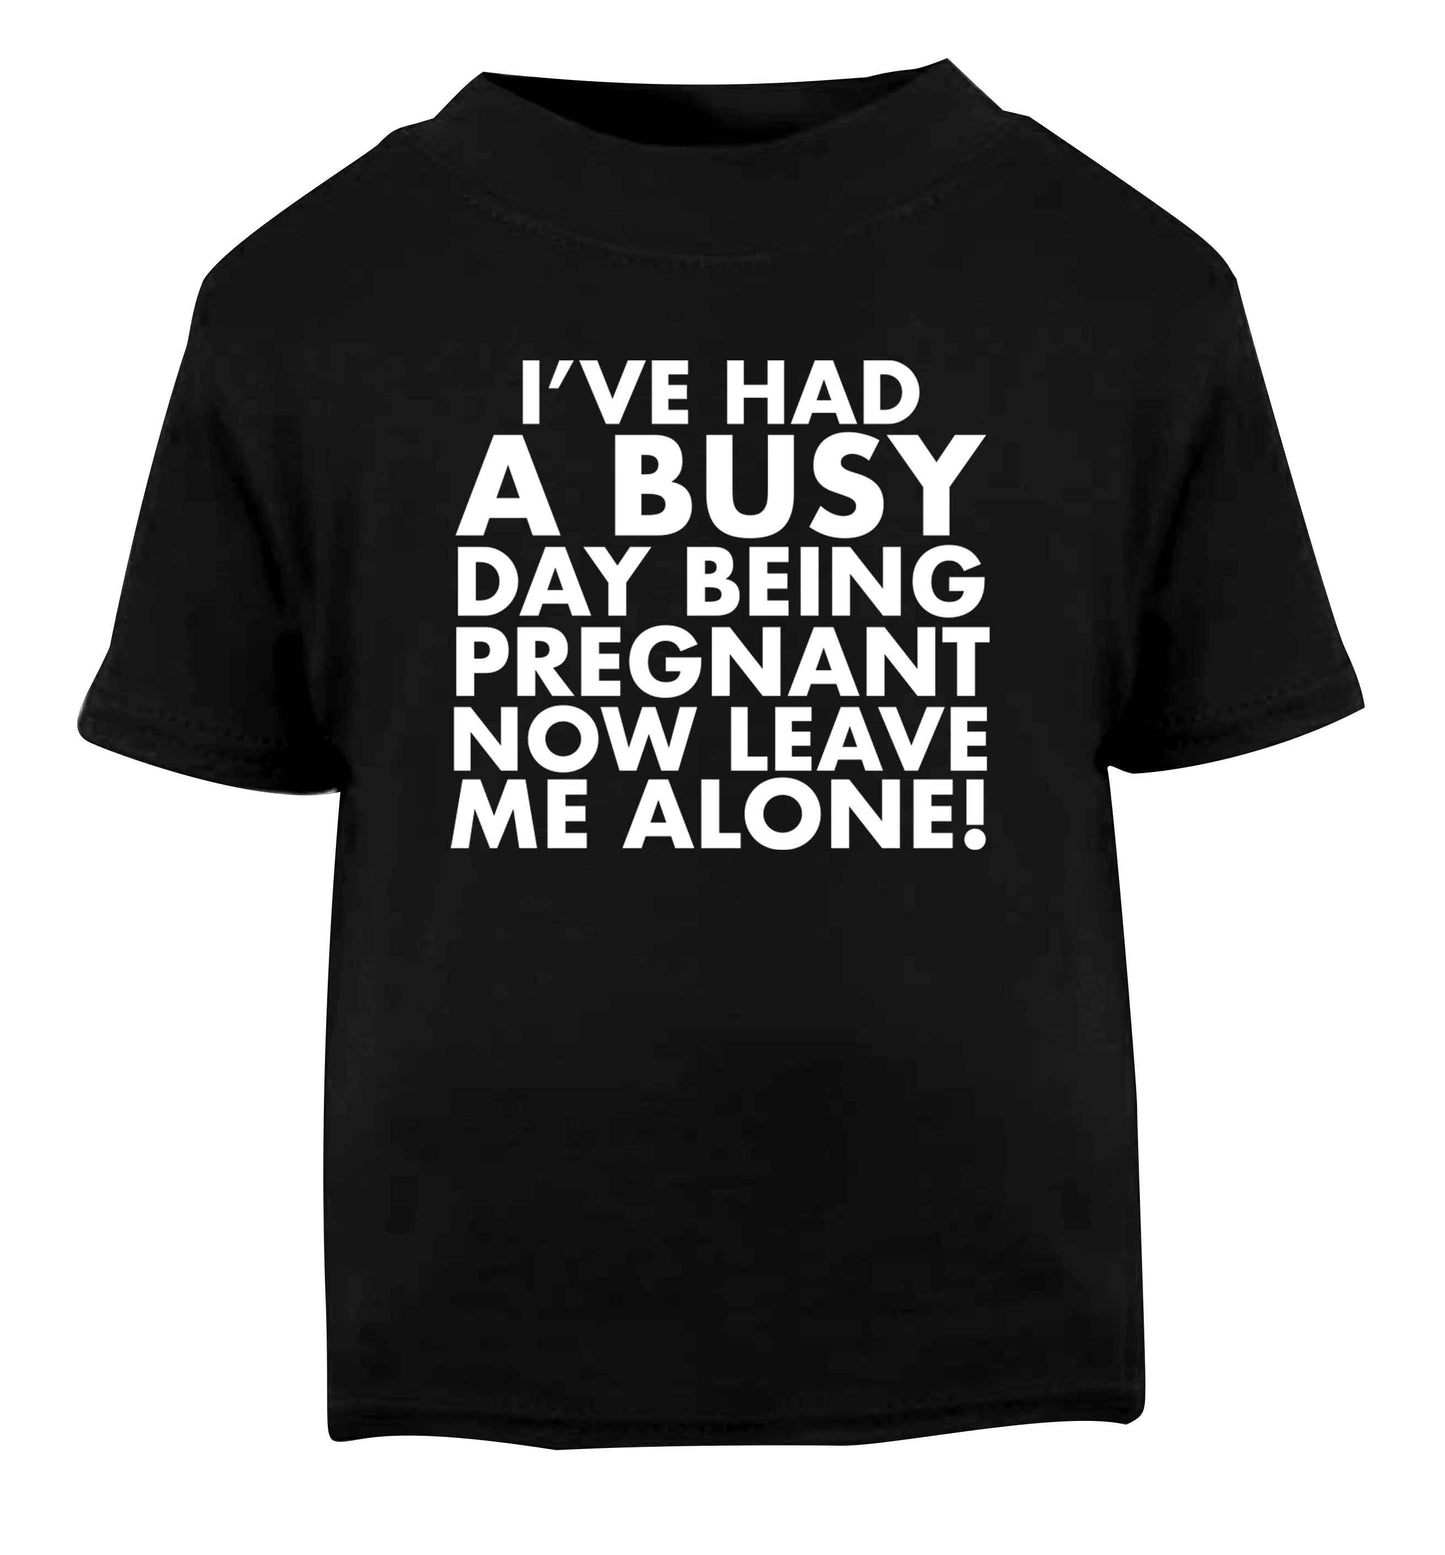 I've had a busy day being pregnant now leave me alone Black Baby Toddler Tshirt 2 years